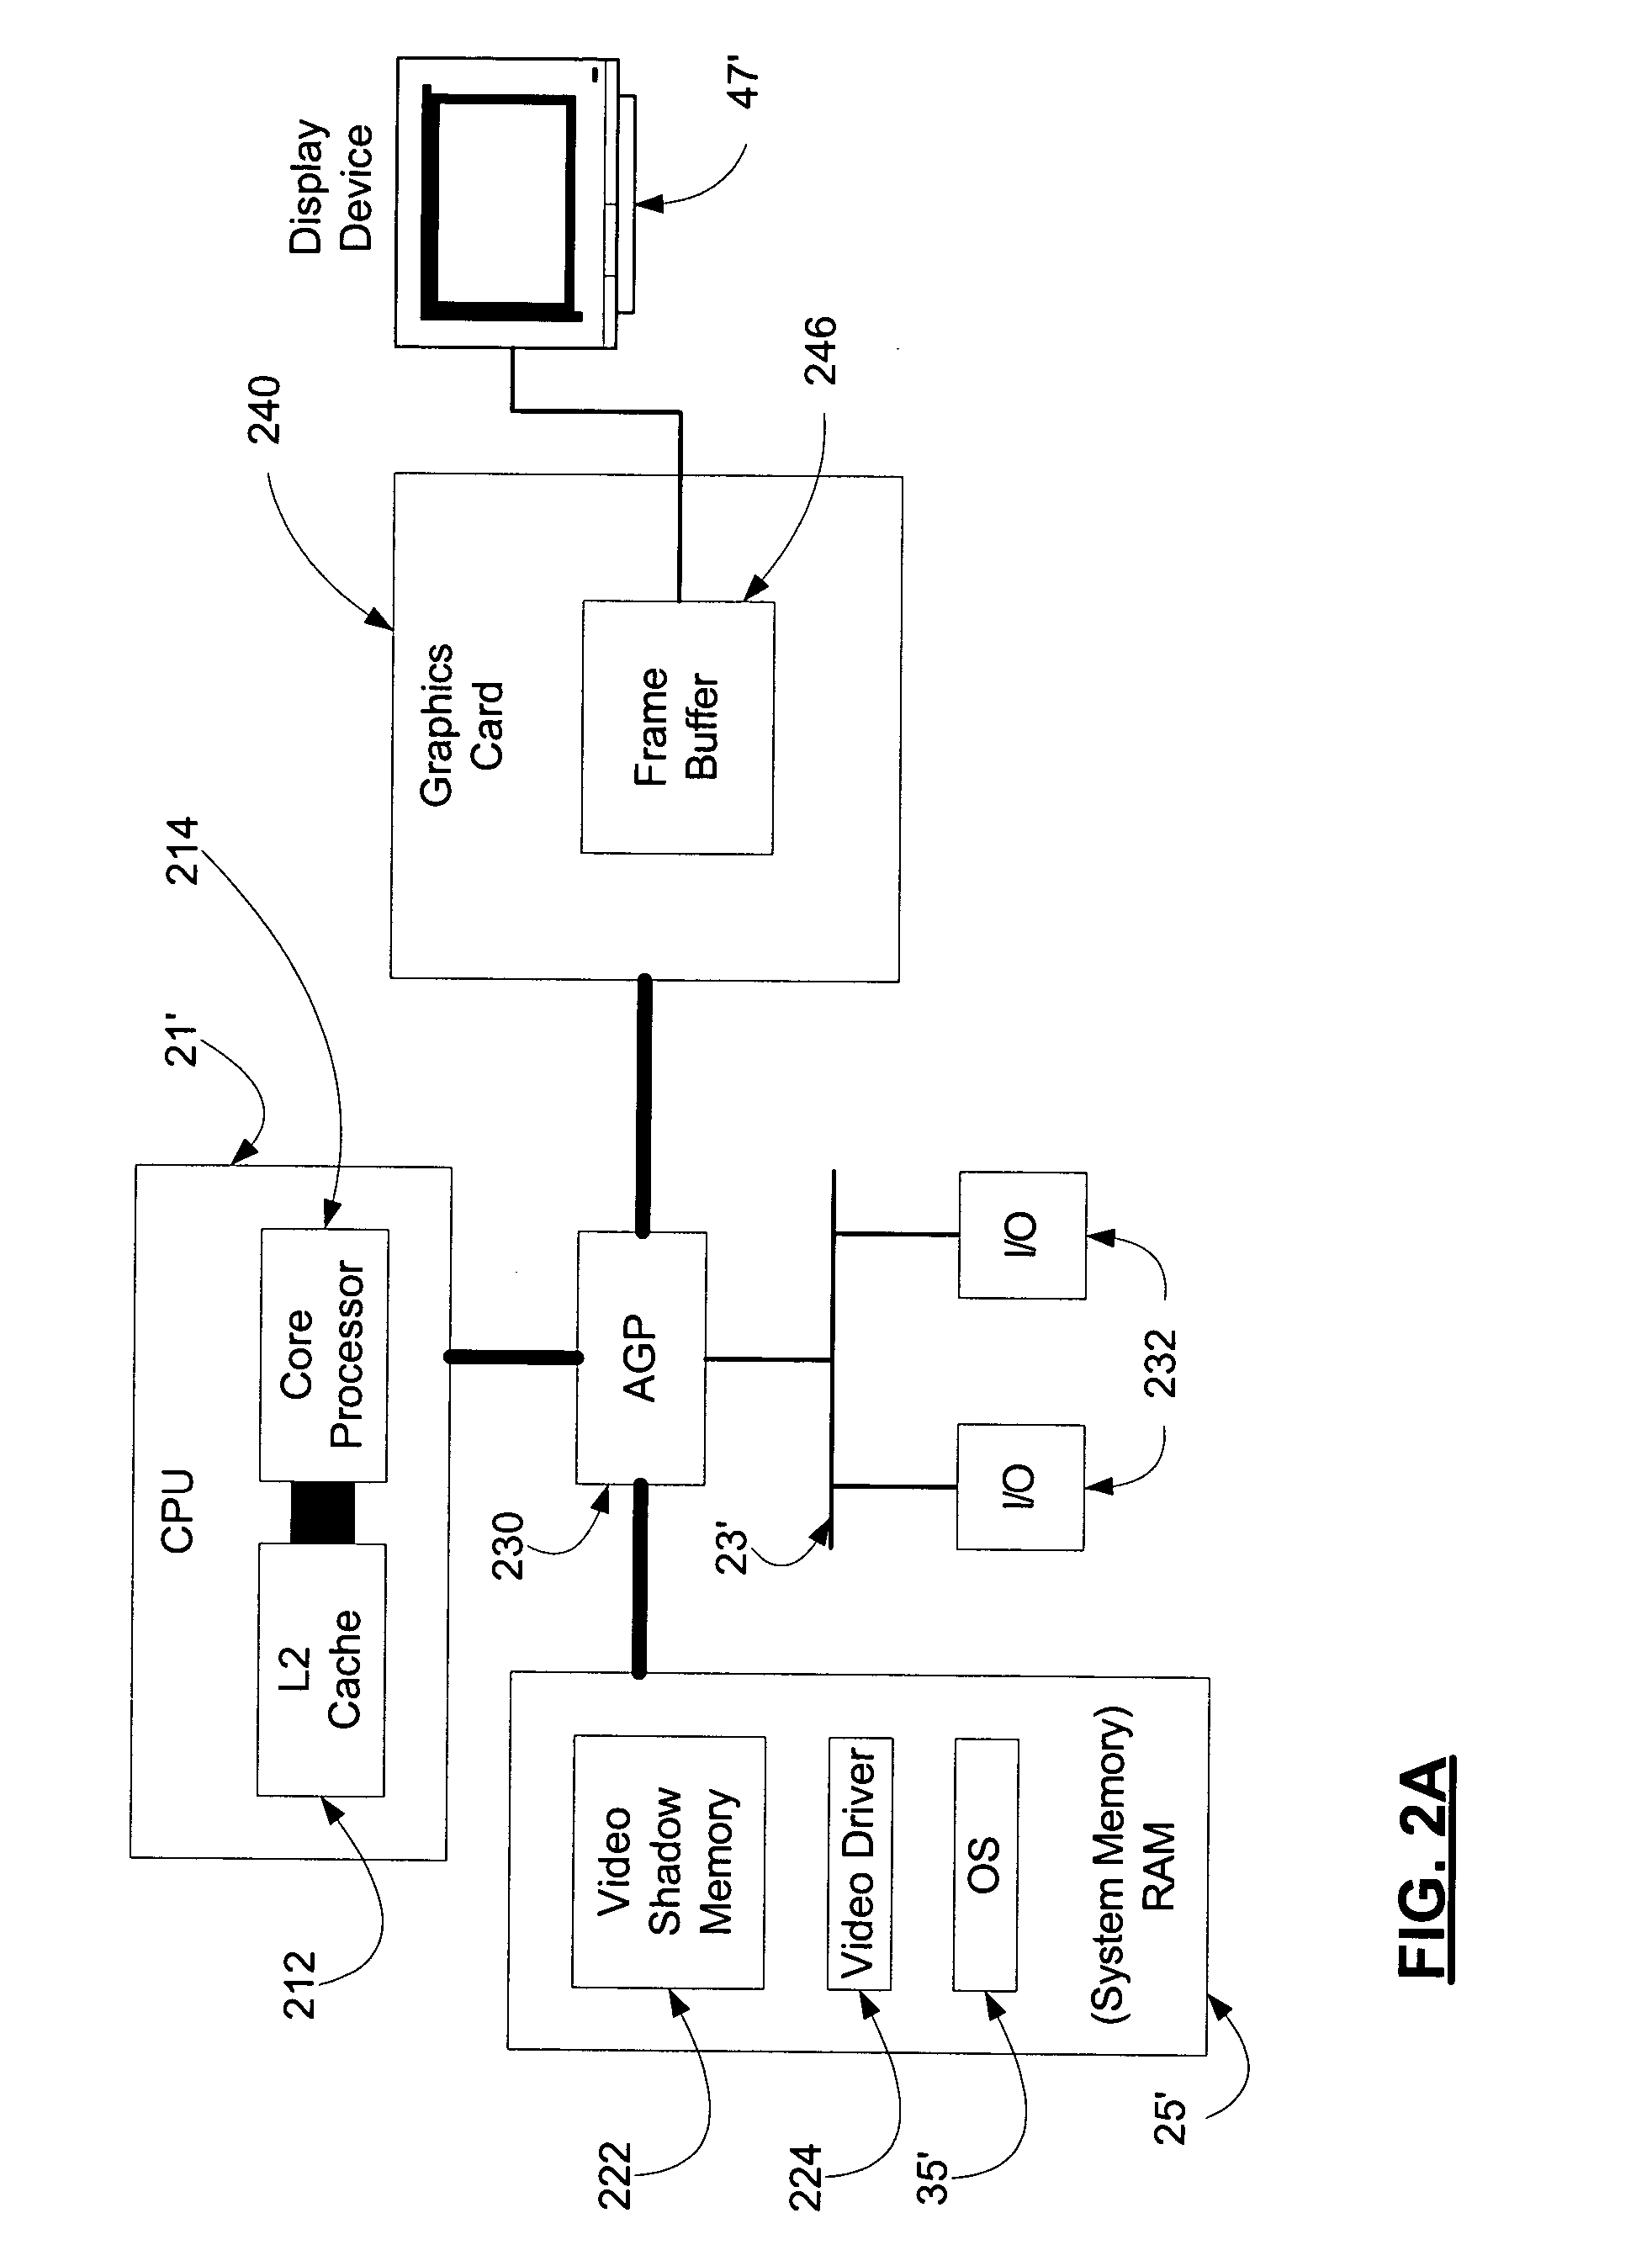 Systems and methods for efficiently updating complex graphics in a computer system by by-passing the graphical processing unit and rendering graphics in main memory